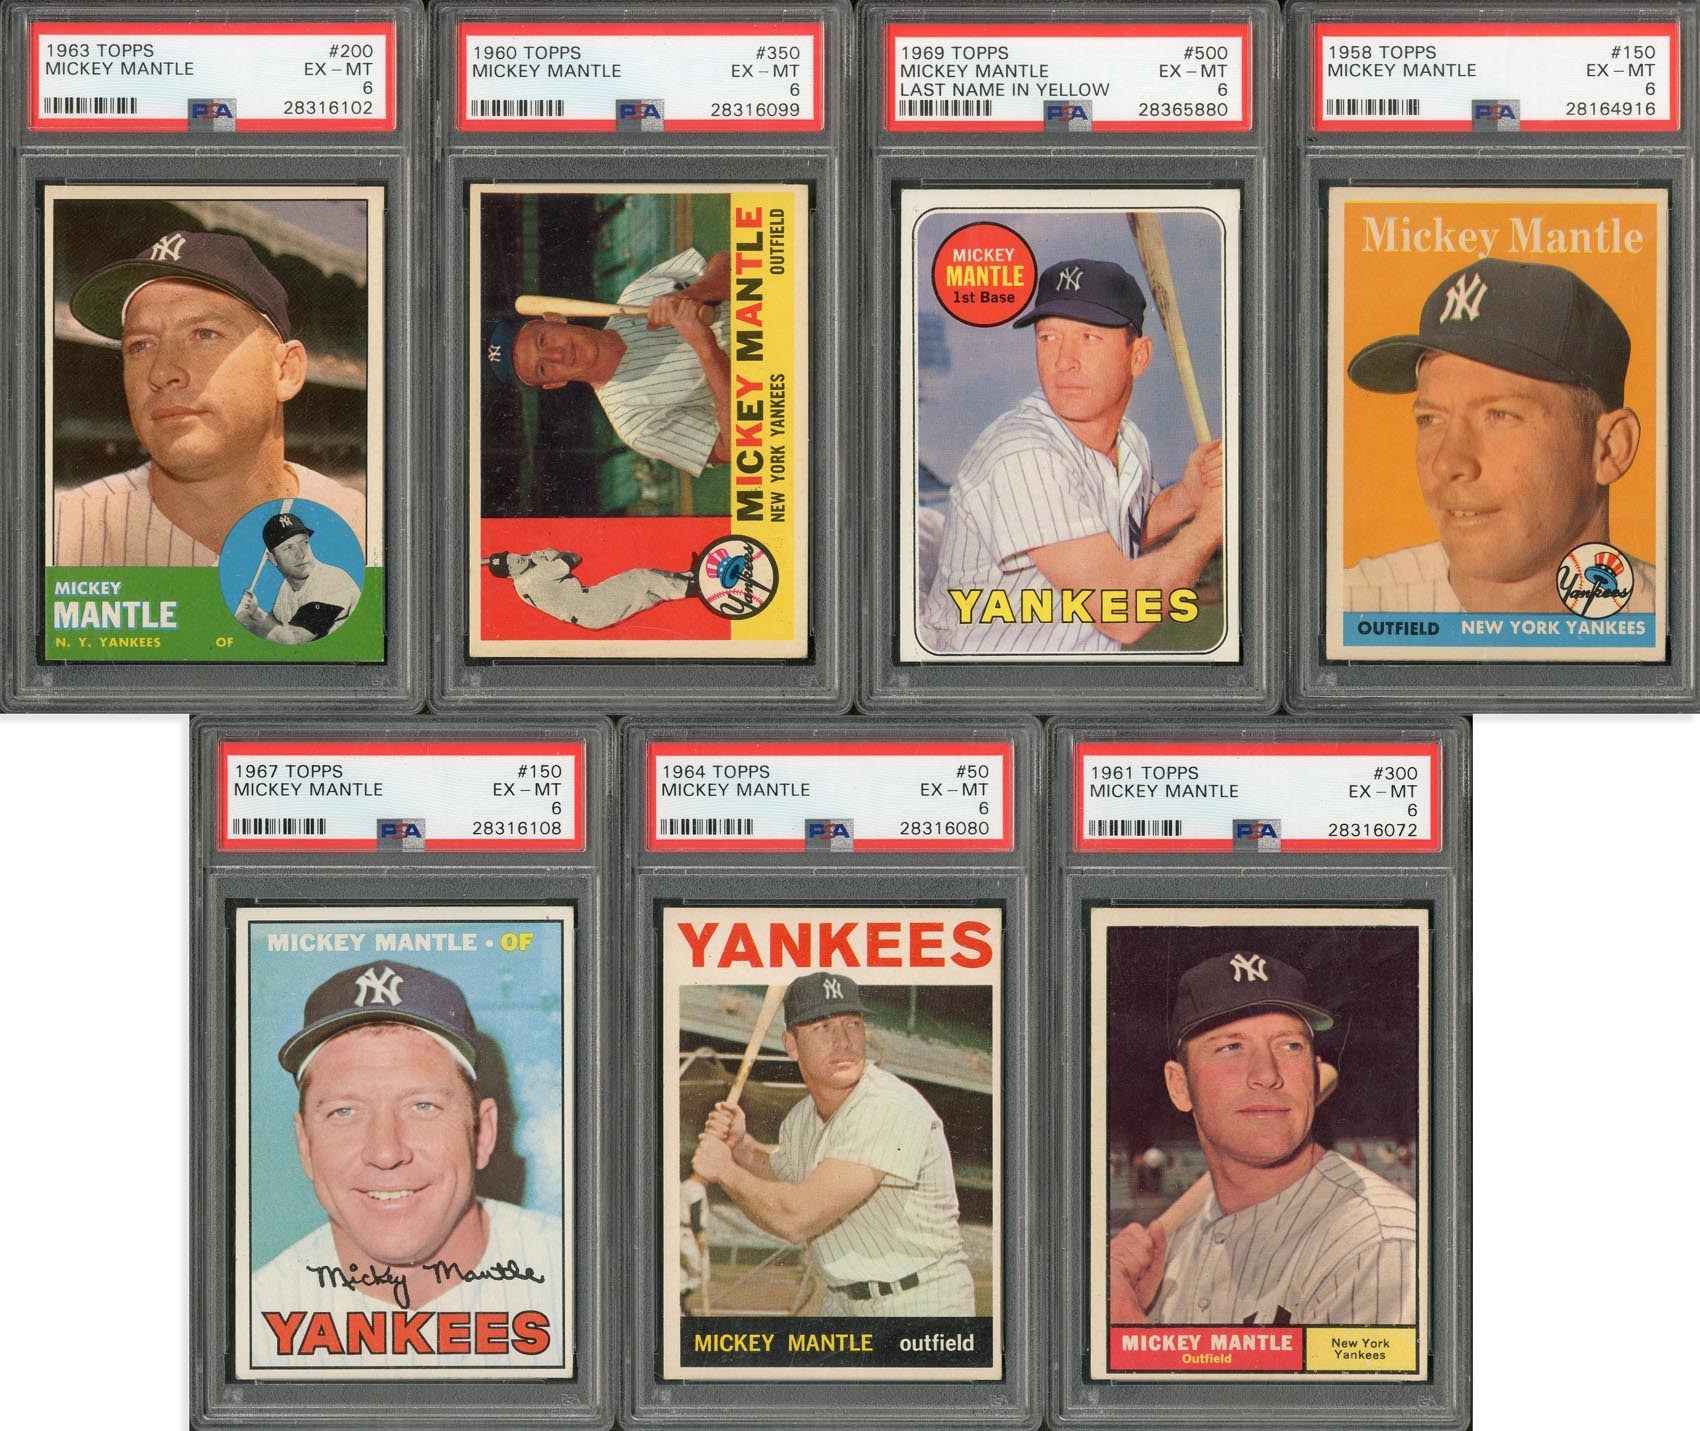 Baseball and Trading Cards - 1958-69 Topps Mickey Mantle PSA Graded Collection (7)